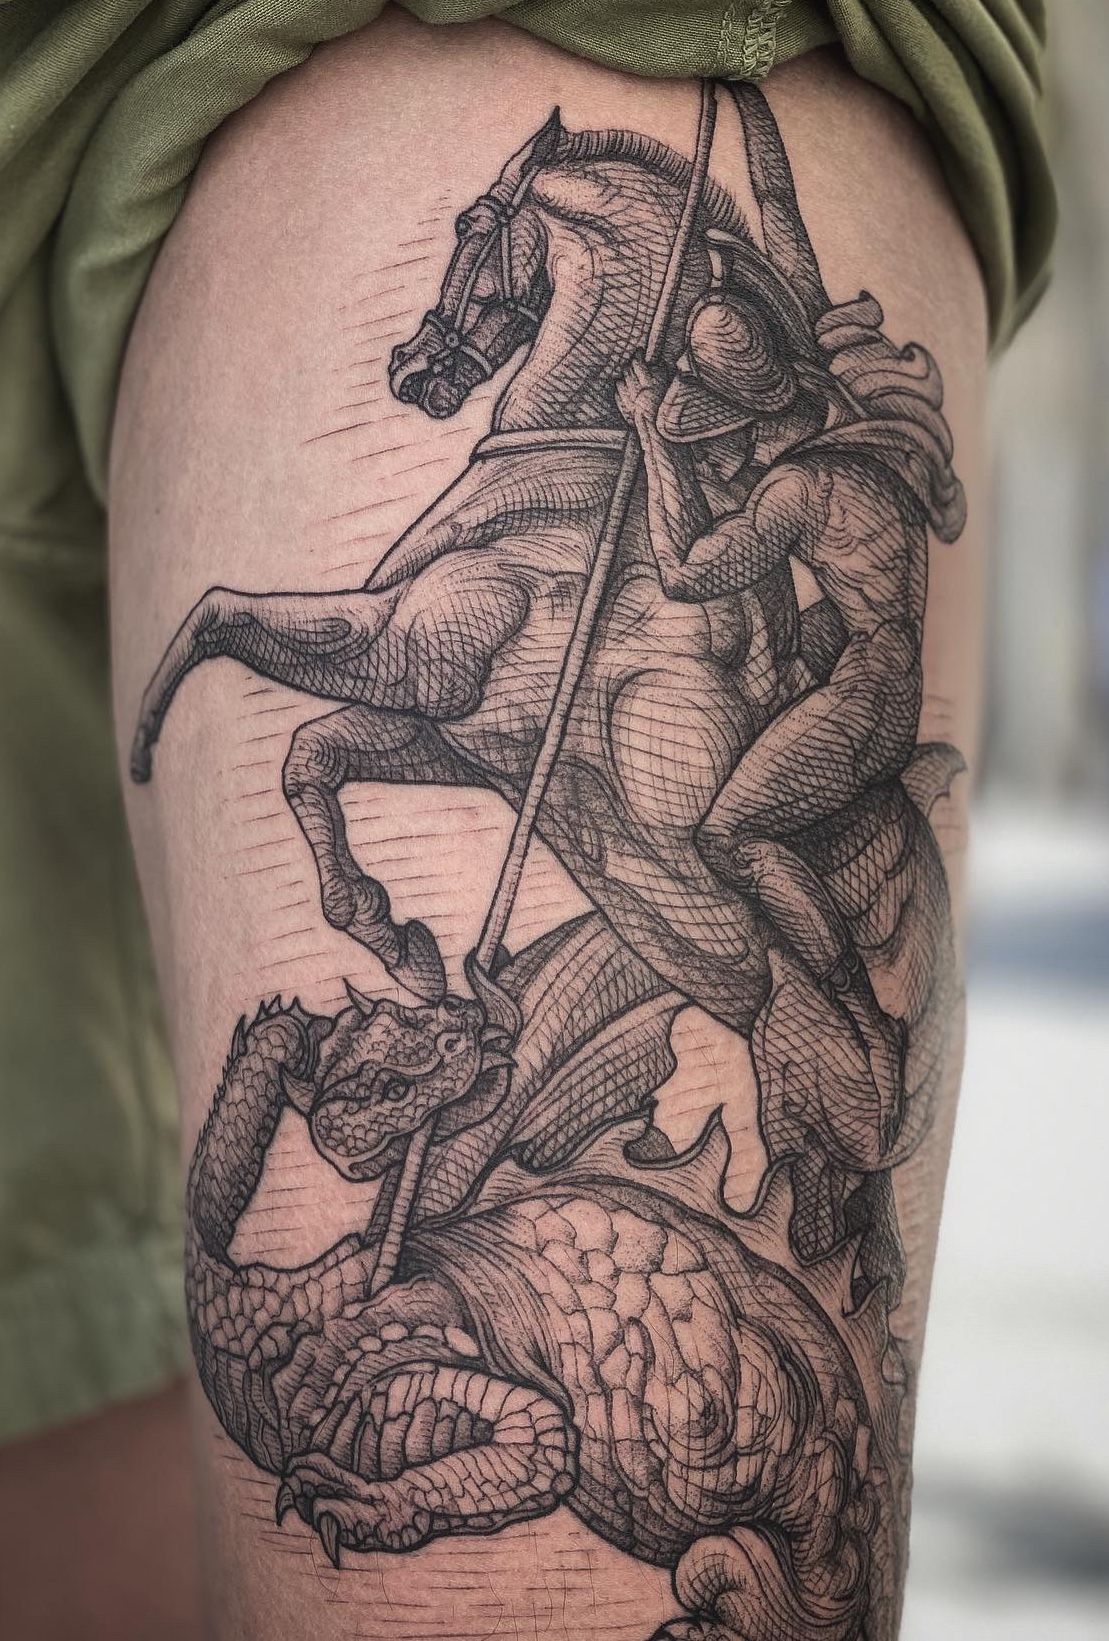 Saint George tattoo located on the chest black and